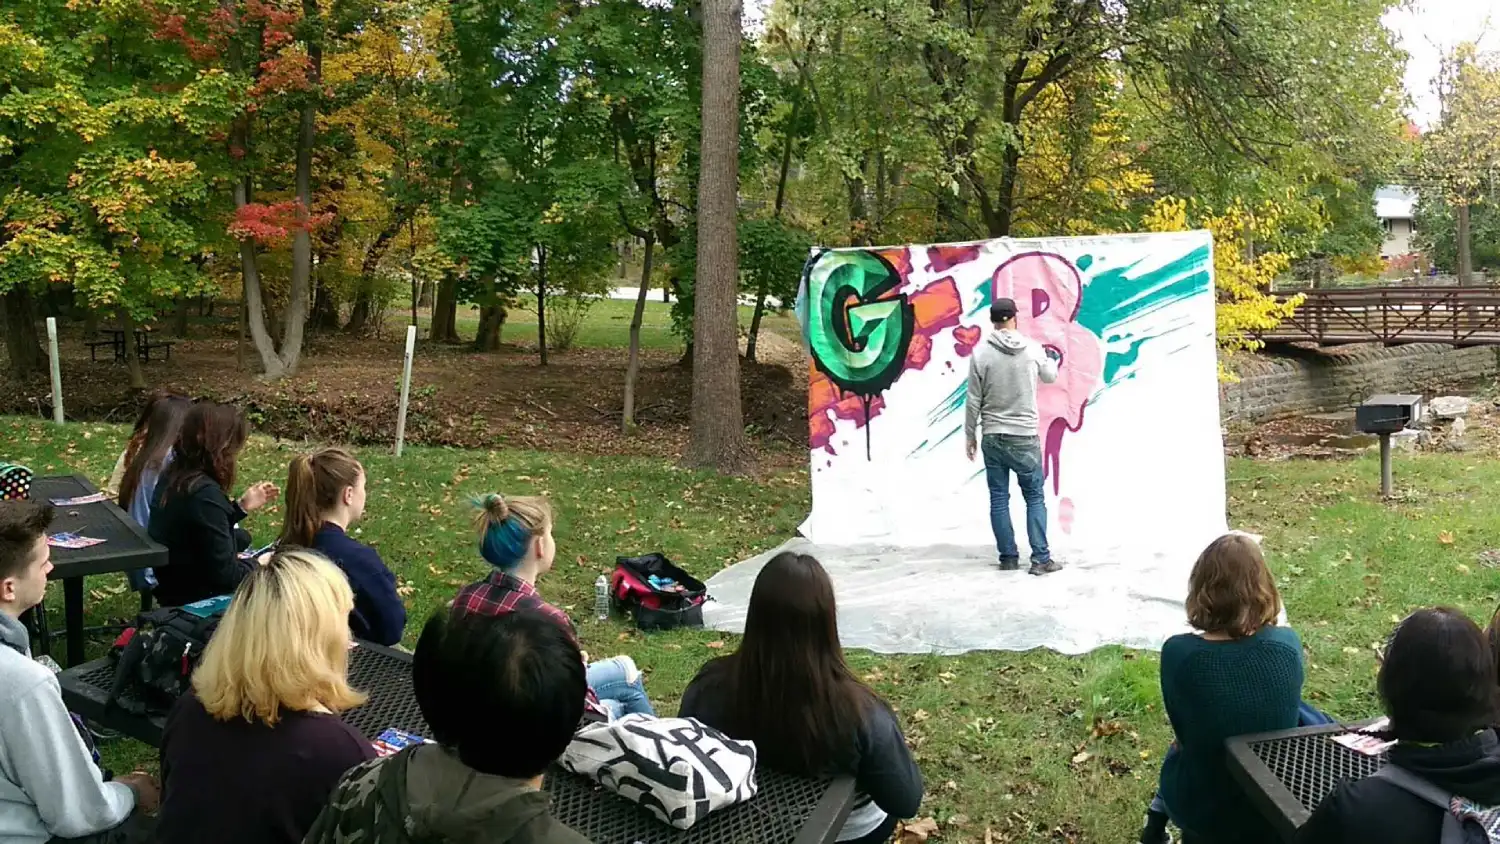 Group of students watch artist spray paint artwork onto white background in park.